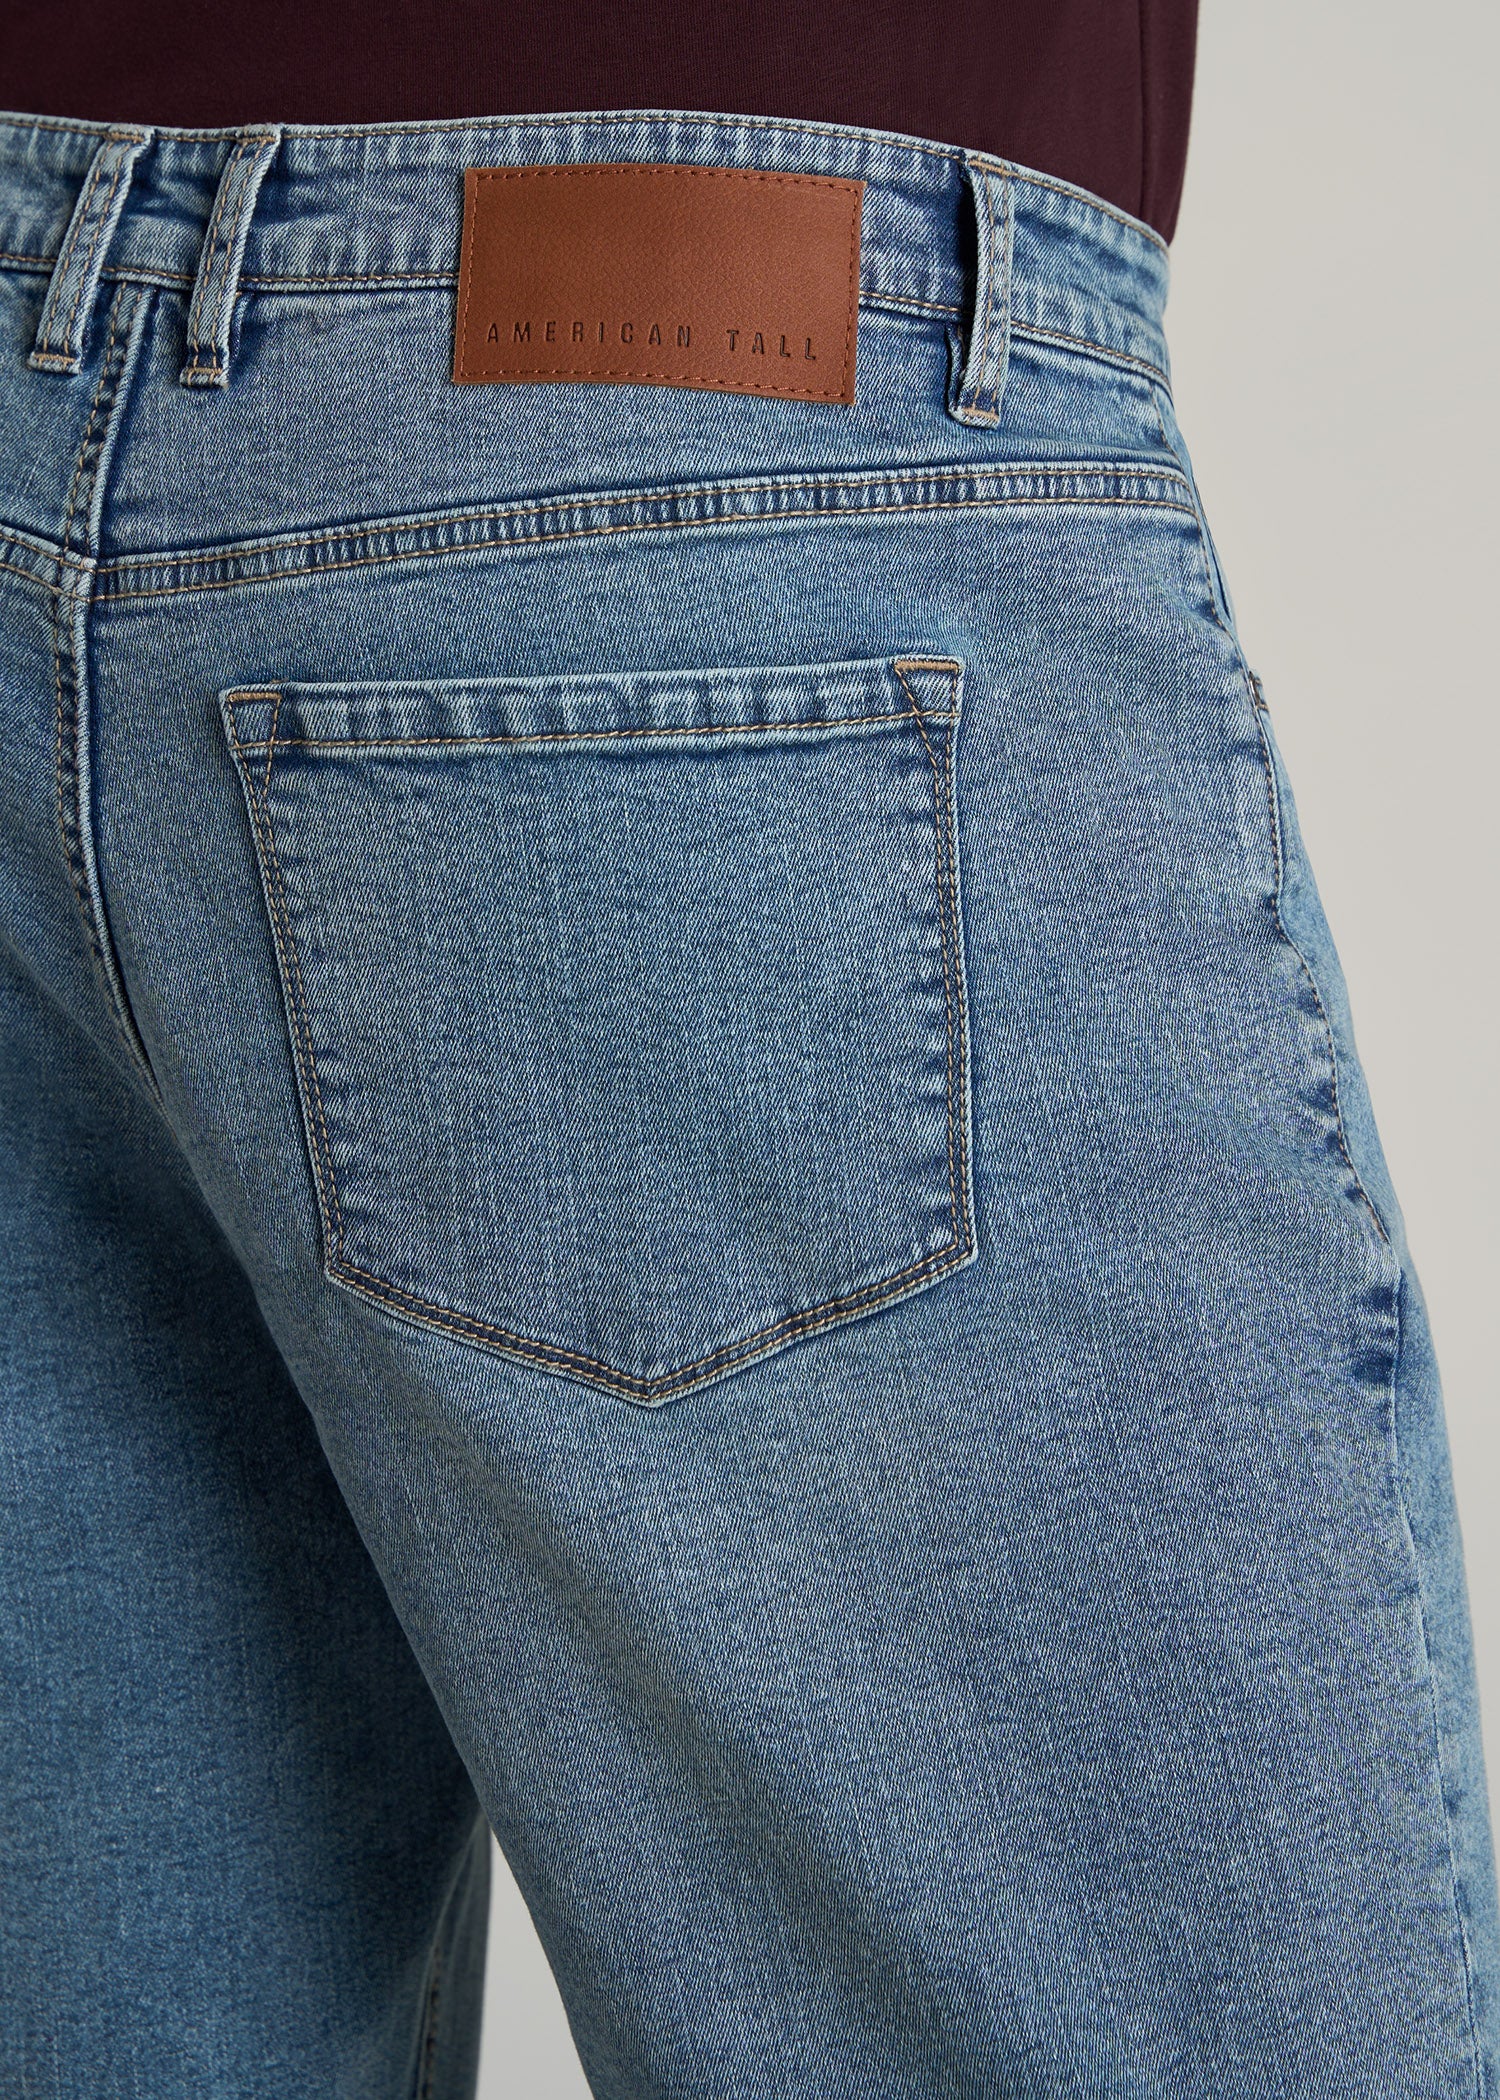    American-Tall-Men-Mason-Semi-Relaxed-Jeans-Vintage-Faded-Blue-detail